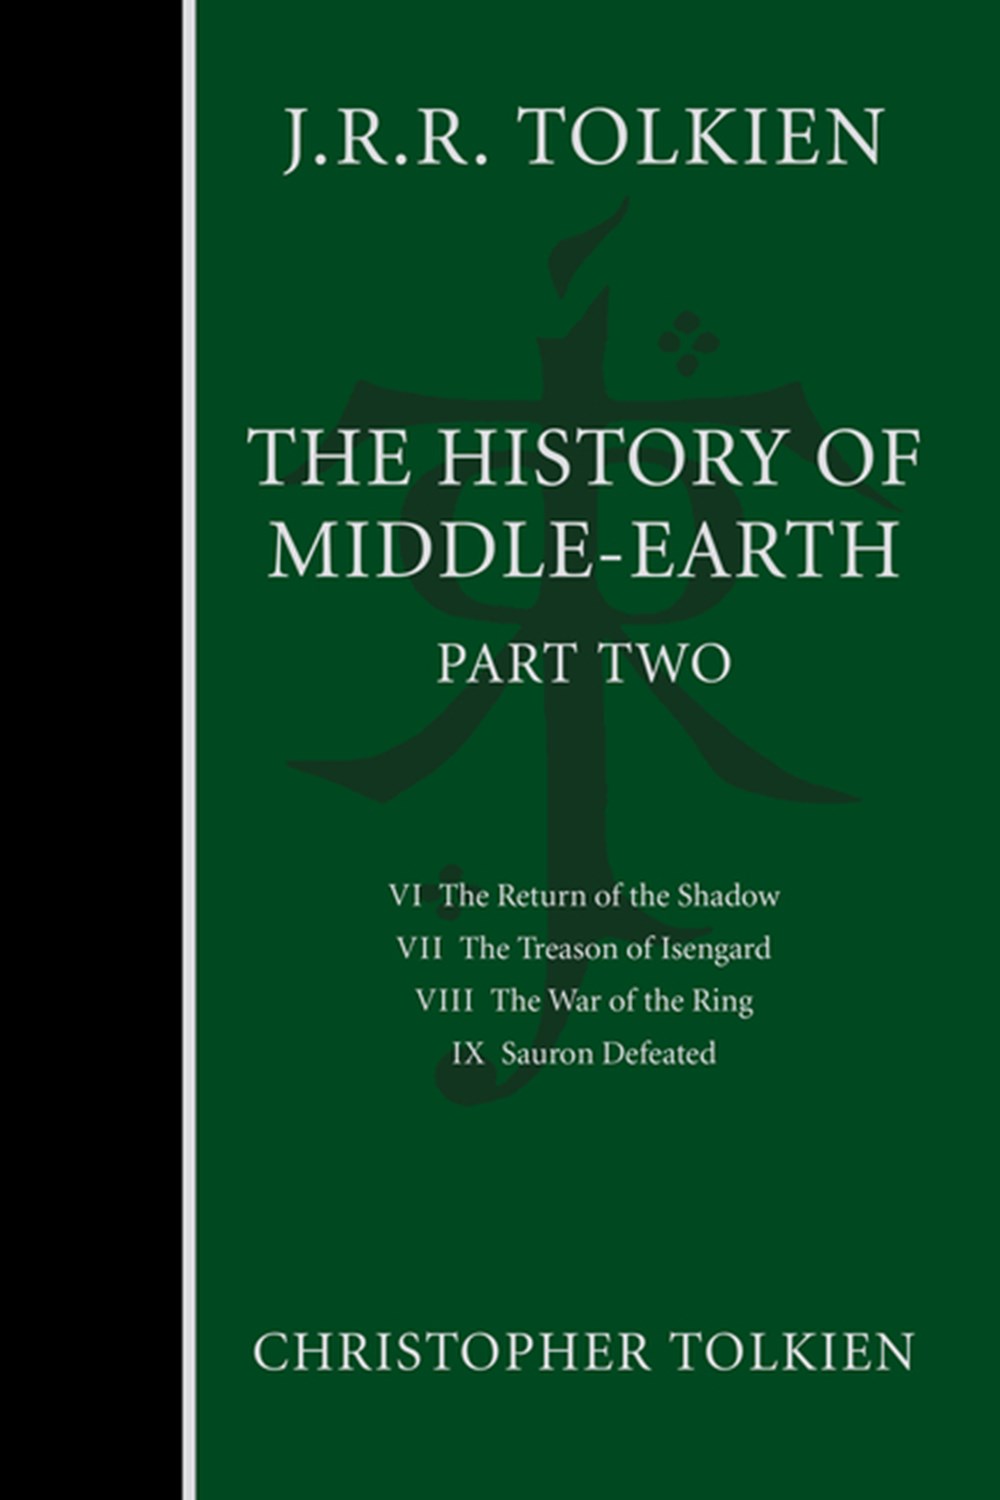 History of Middle-Earth, Part Two